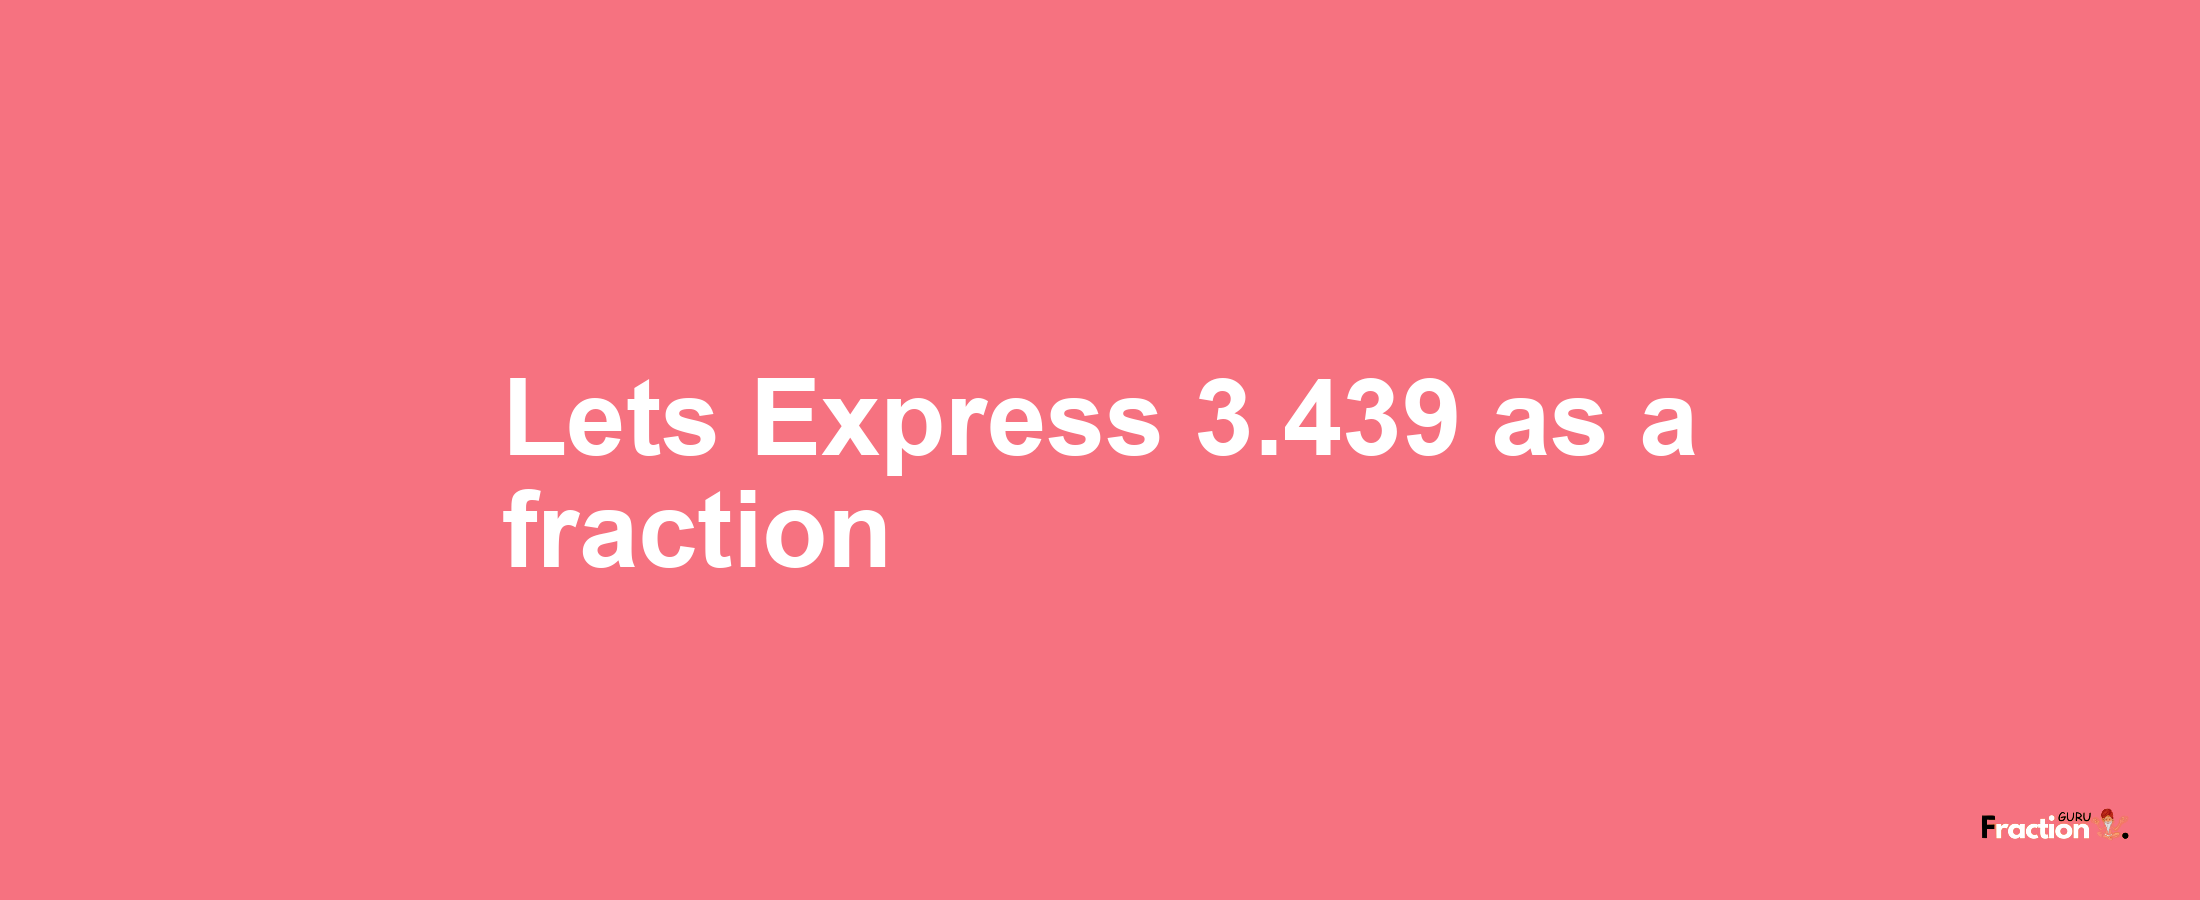 Lets Express 3.439 as afraction